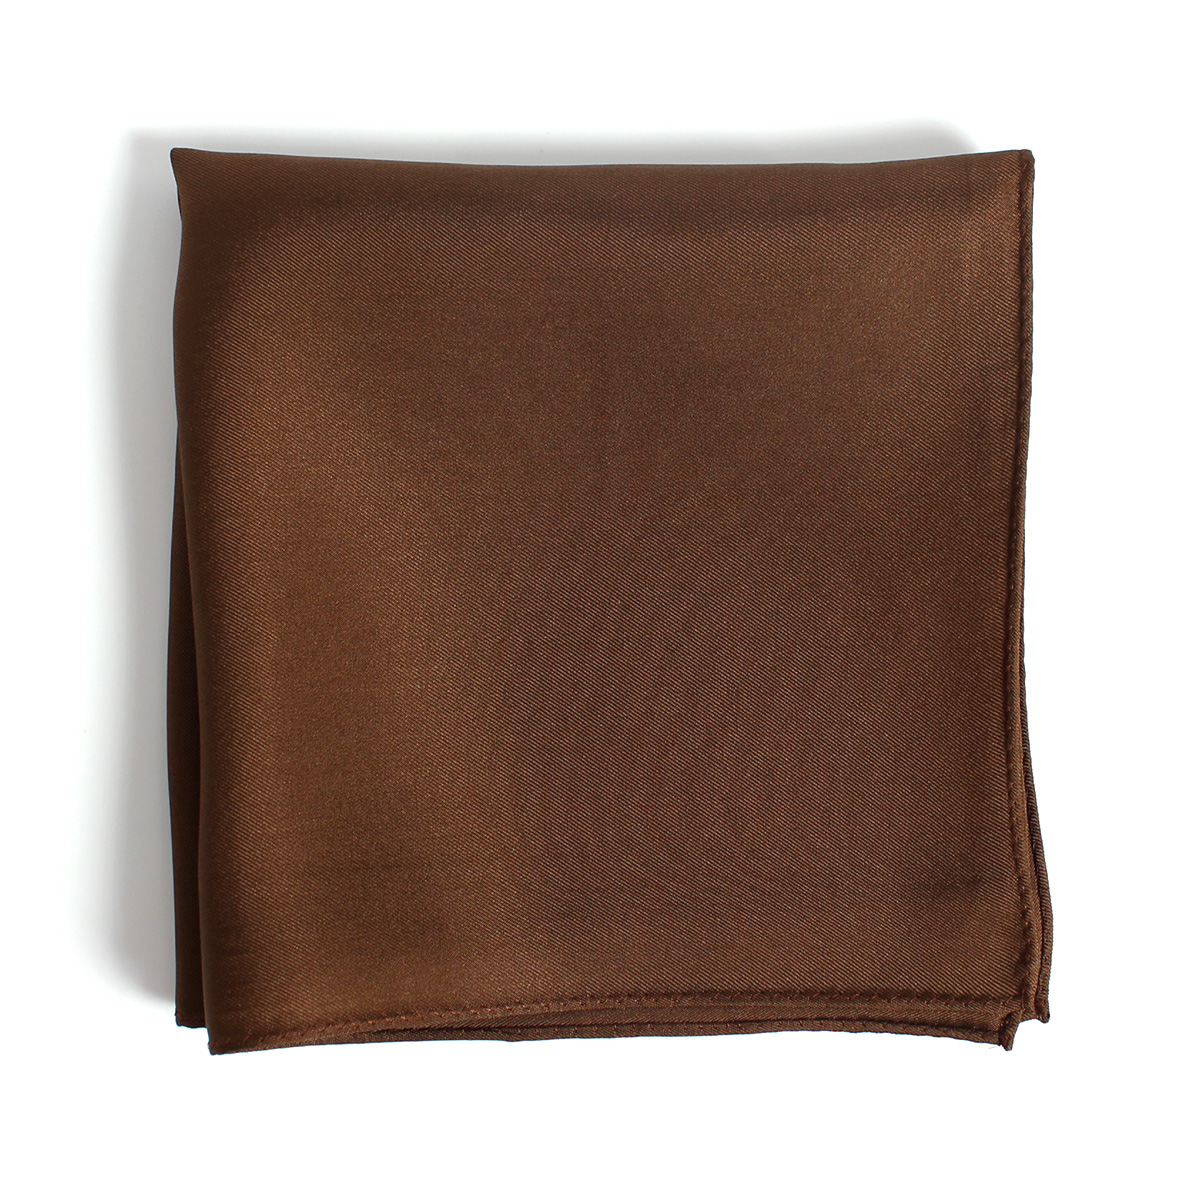 CF-1140 Made In Japan Twill 16 Momme Silk Pocket Square Brown[Formal Accessories] Yamamoto(EXCY)